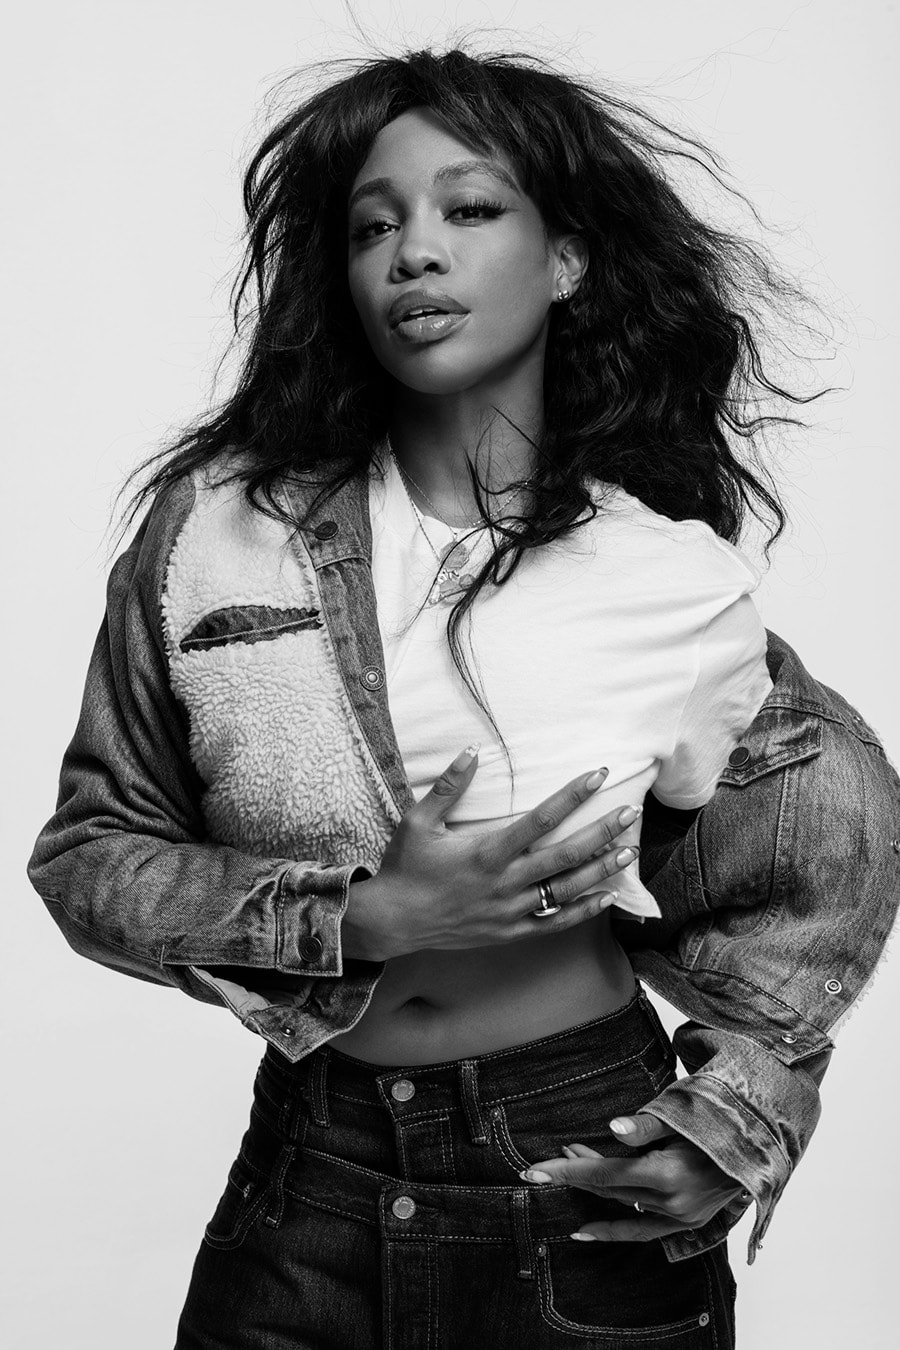 Levi's 501 Campaign With SZA and Hailey Baldwin